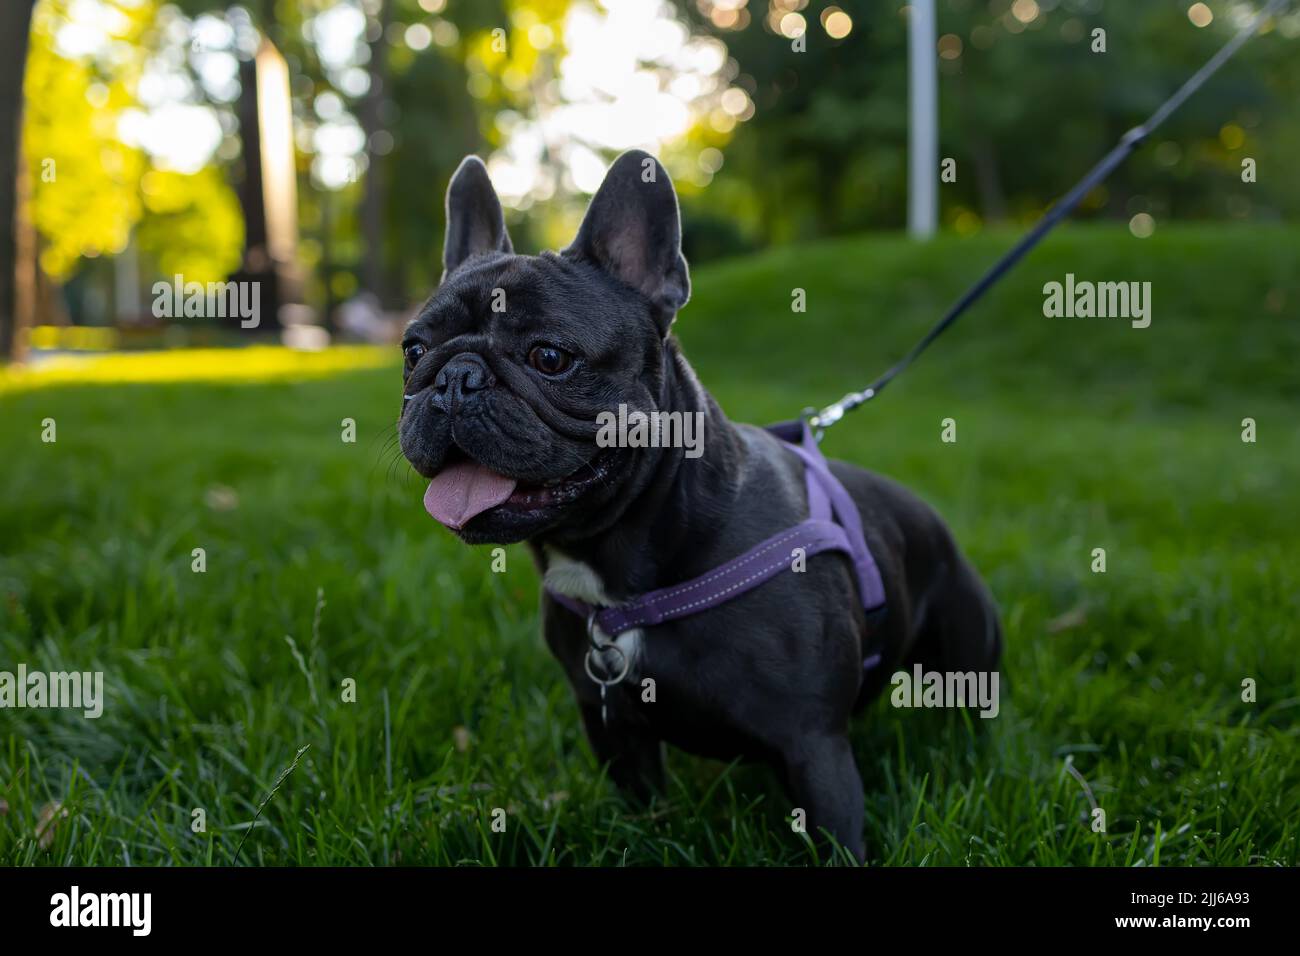 beautiful dog breed french bulldog pricked up and looks intently to the side Stock Photo